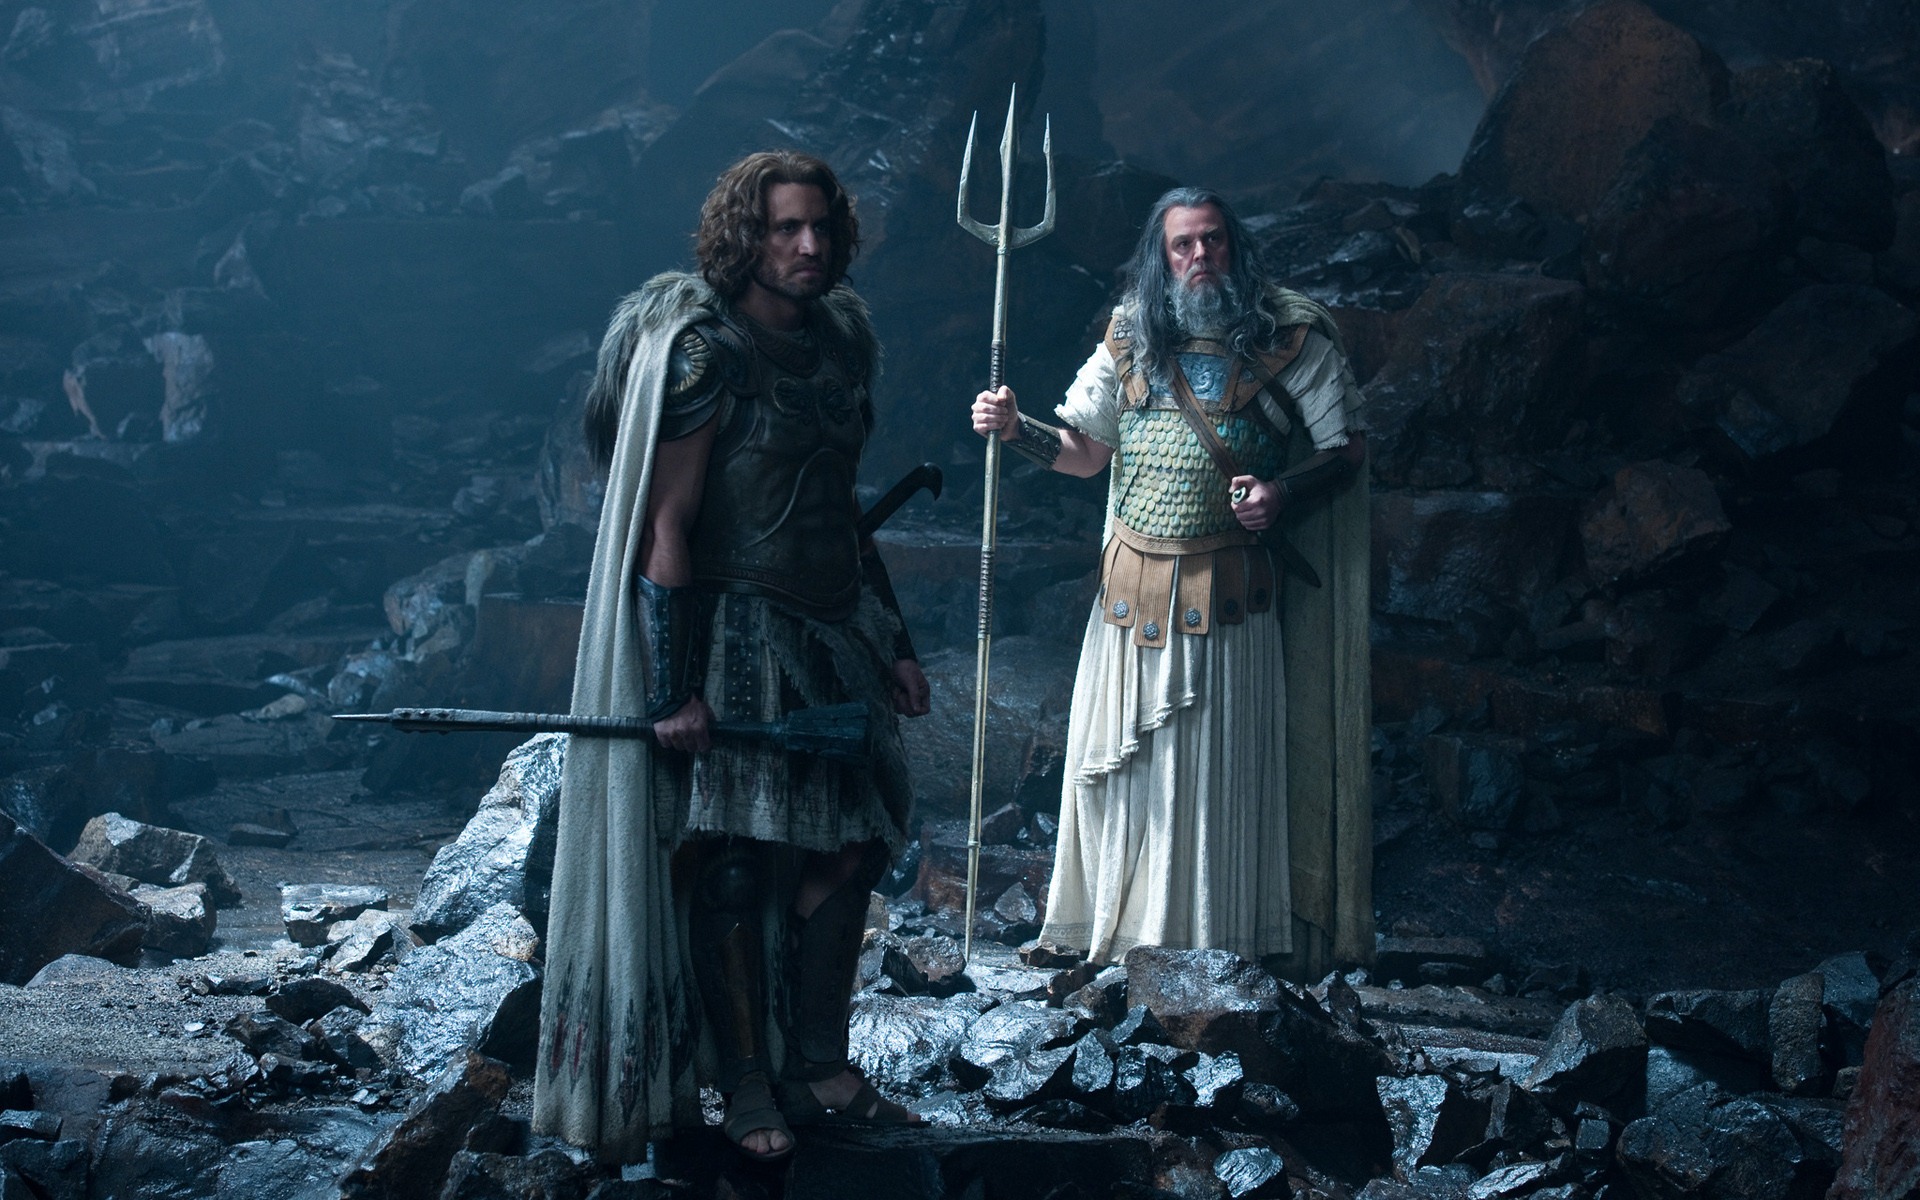 Wrath of the Titans HD Wallpapers #2 - 1920x1200